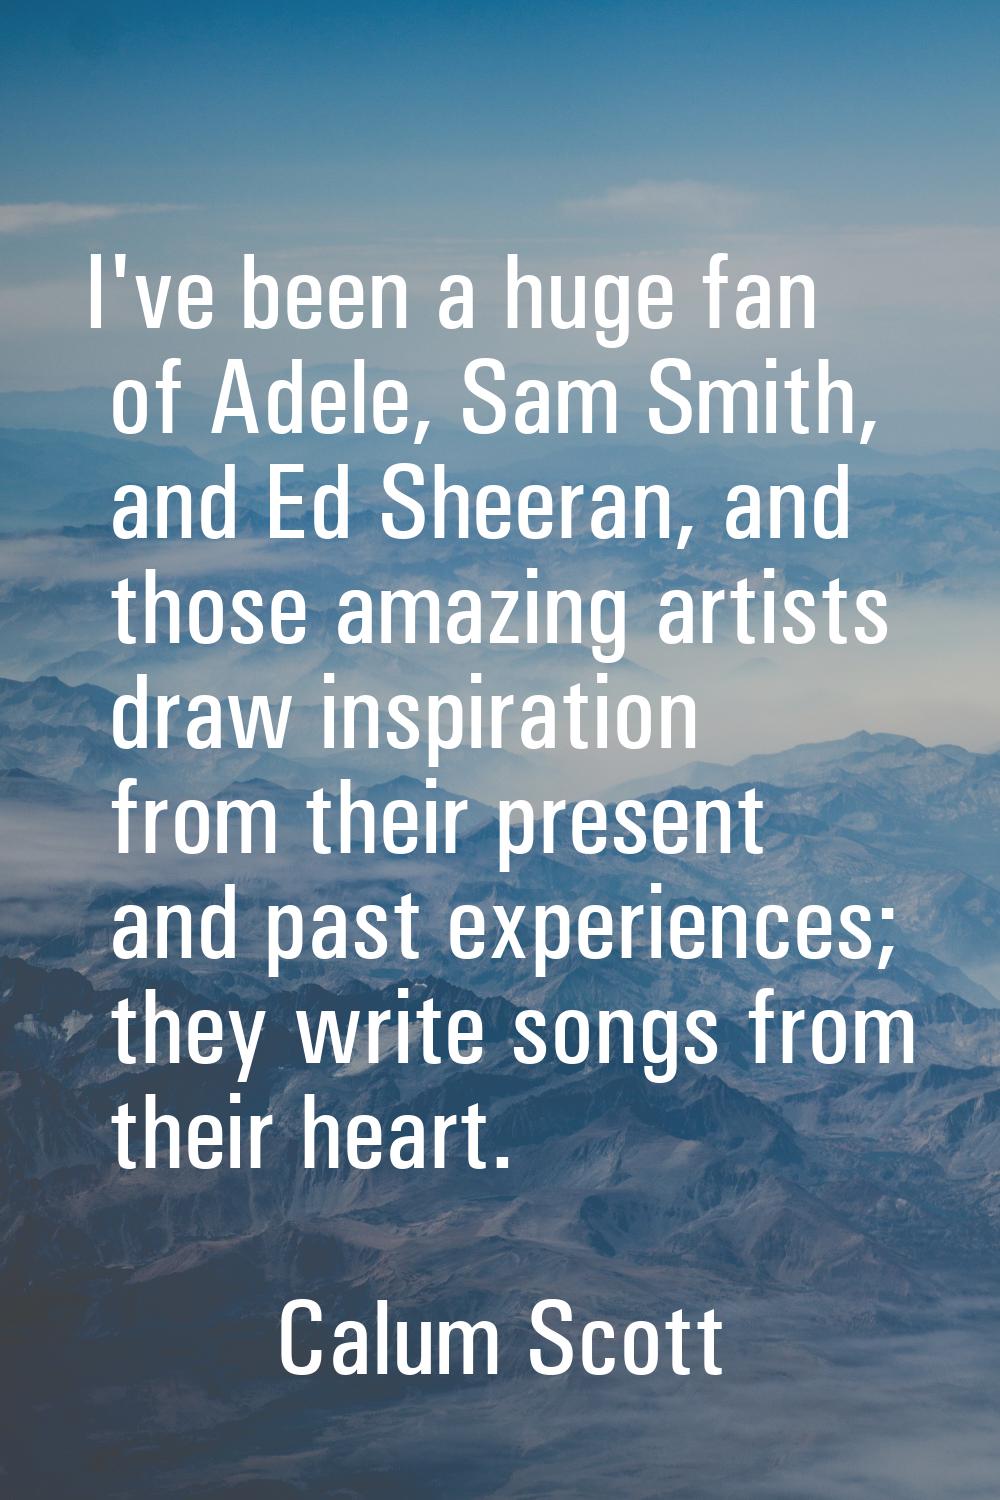 I've been a huge fan of Adele, Sam Smith, and Ed Sheeran, and those amazing artists draw inspiratio